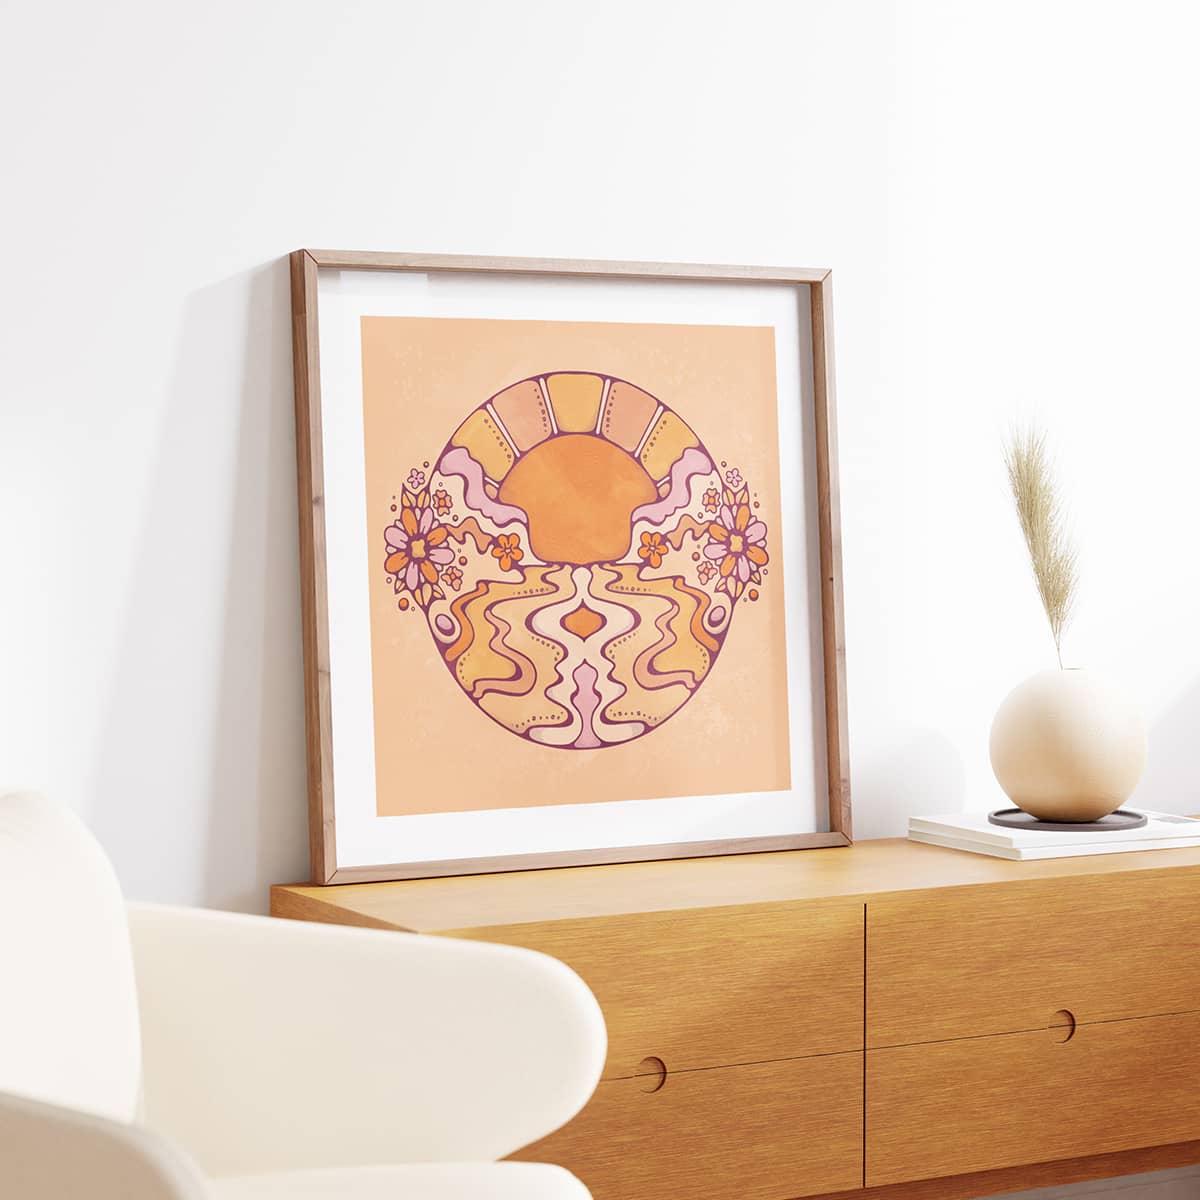 Boho style Byron Bay water landscape art set against a rising sun and floral bursts.